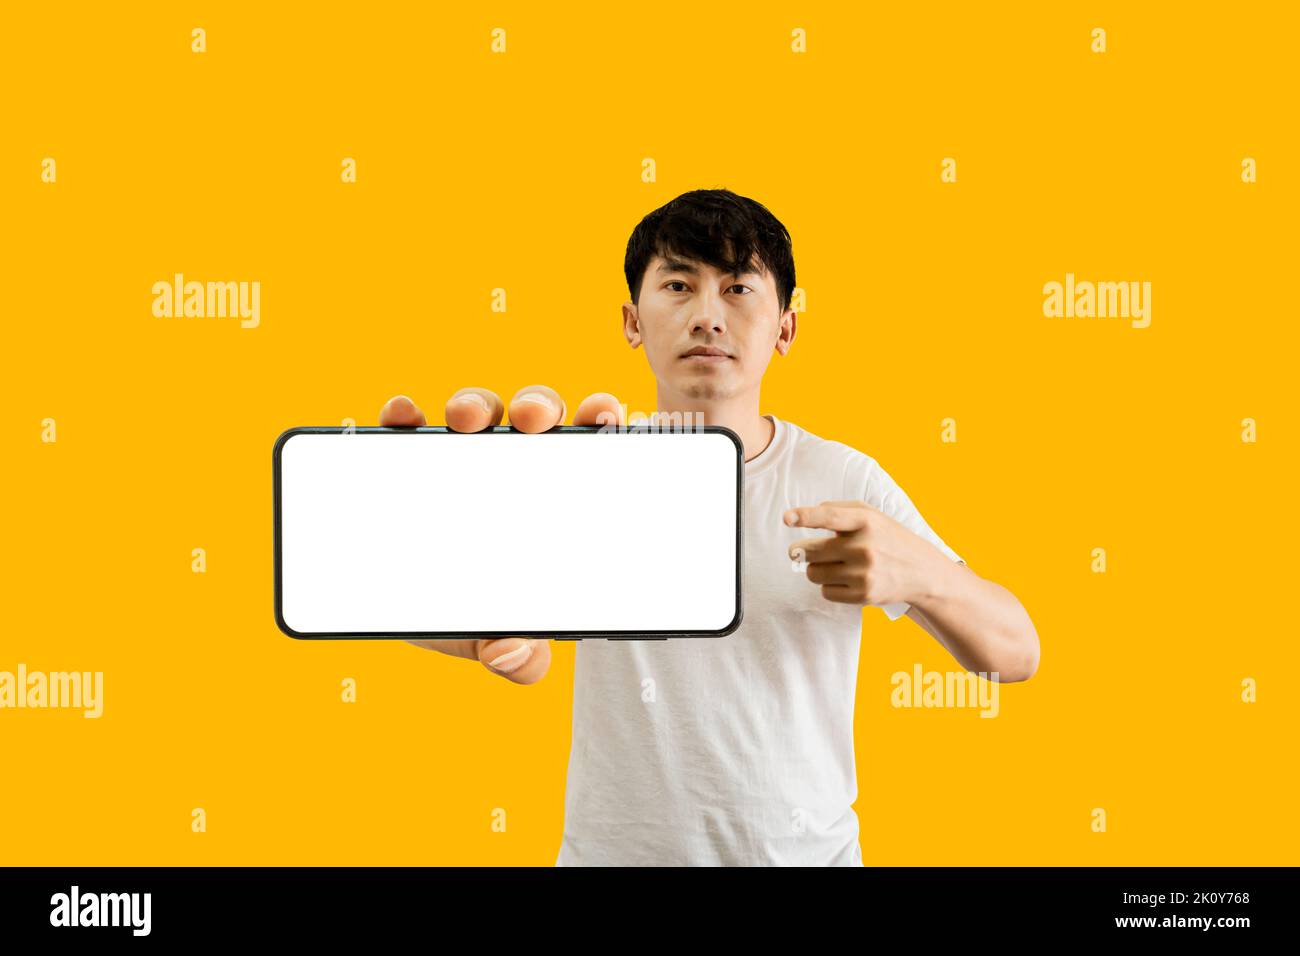 Asian Man Holding Smartphone With White Empty Screen On Yellow Background. Cellphone display Mockup for Mobile App Advertisement. Stock Photo